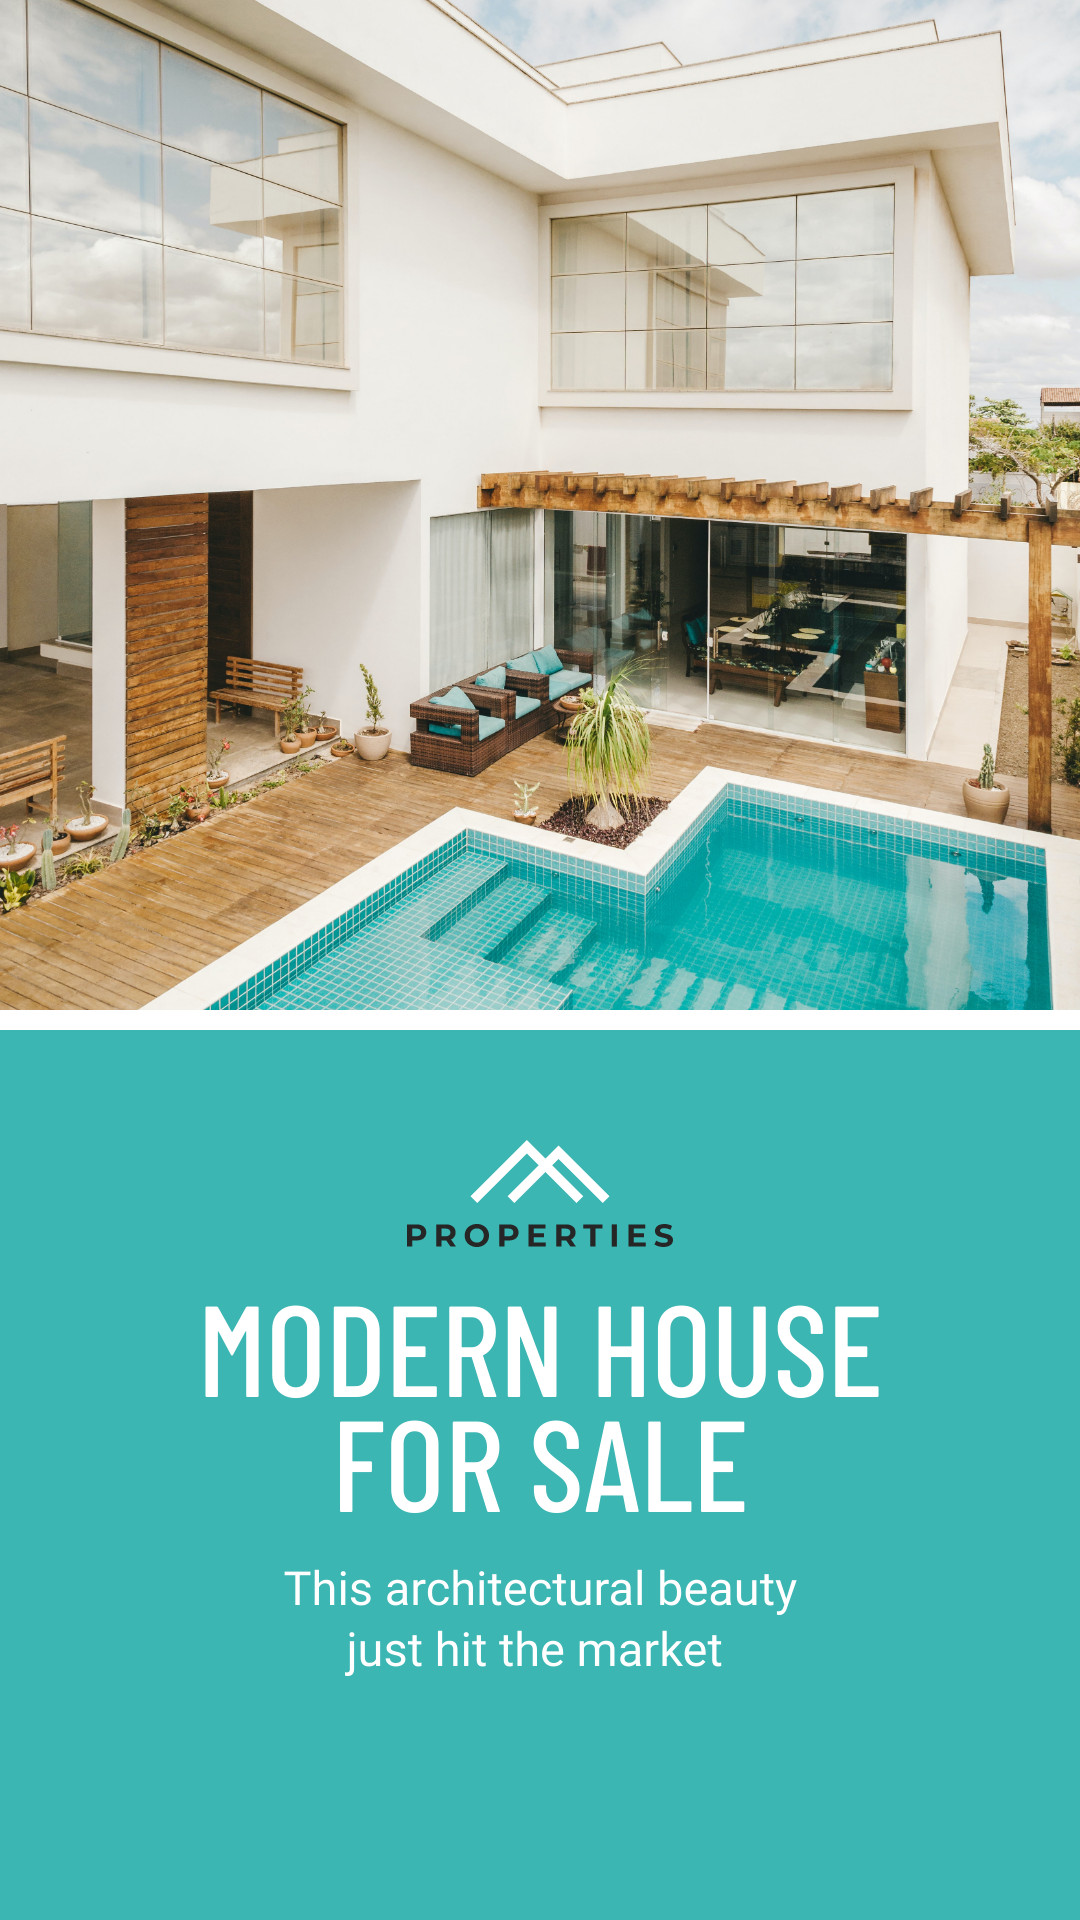 Modern House with Pool for Sale Inline Rectangle 300x250